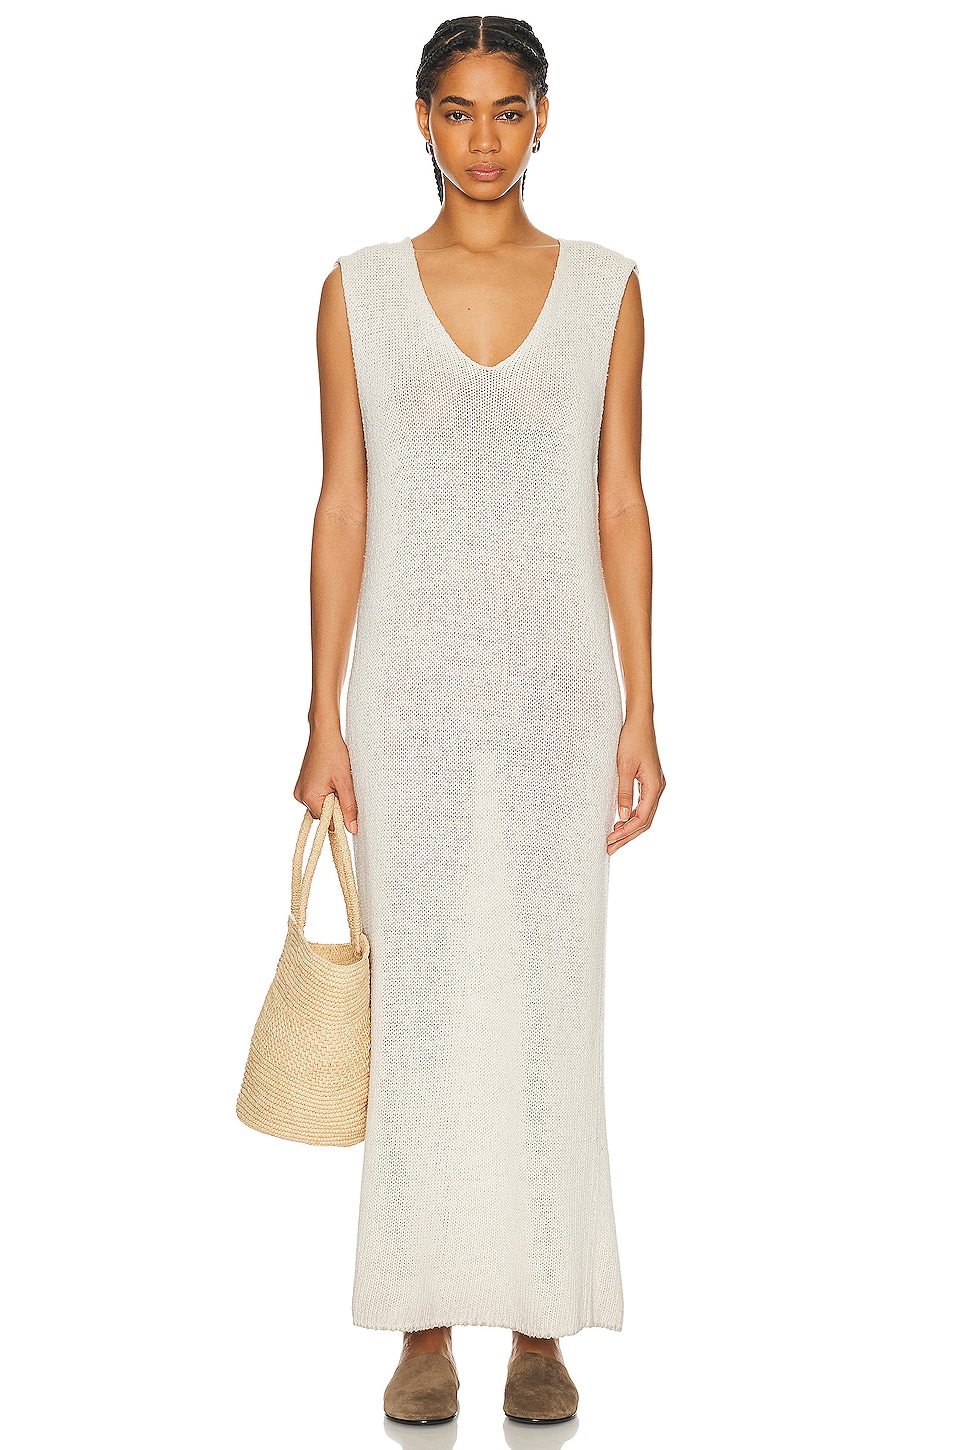 Image 1 of The Row Folosa Dress in WHITE